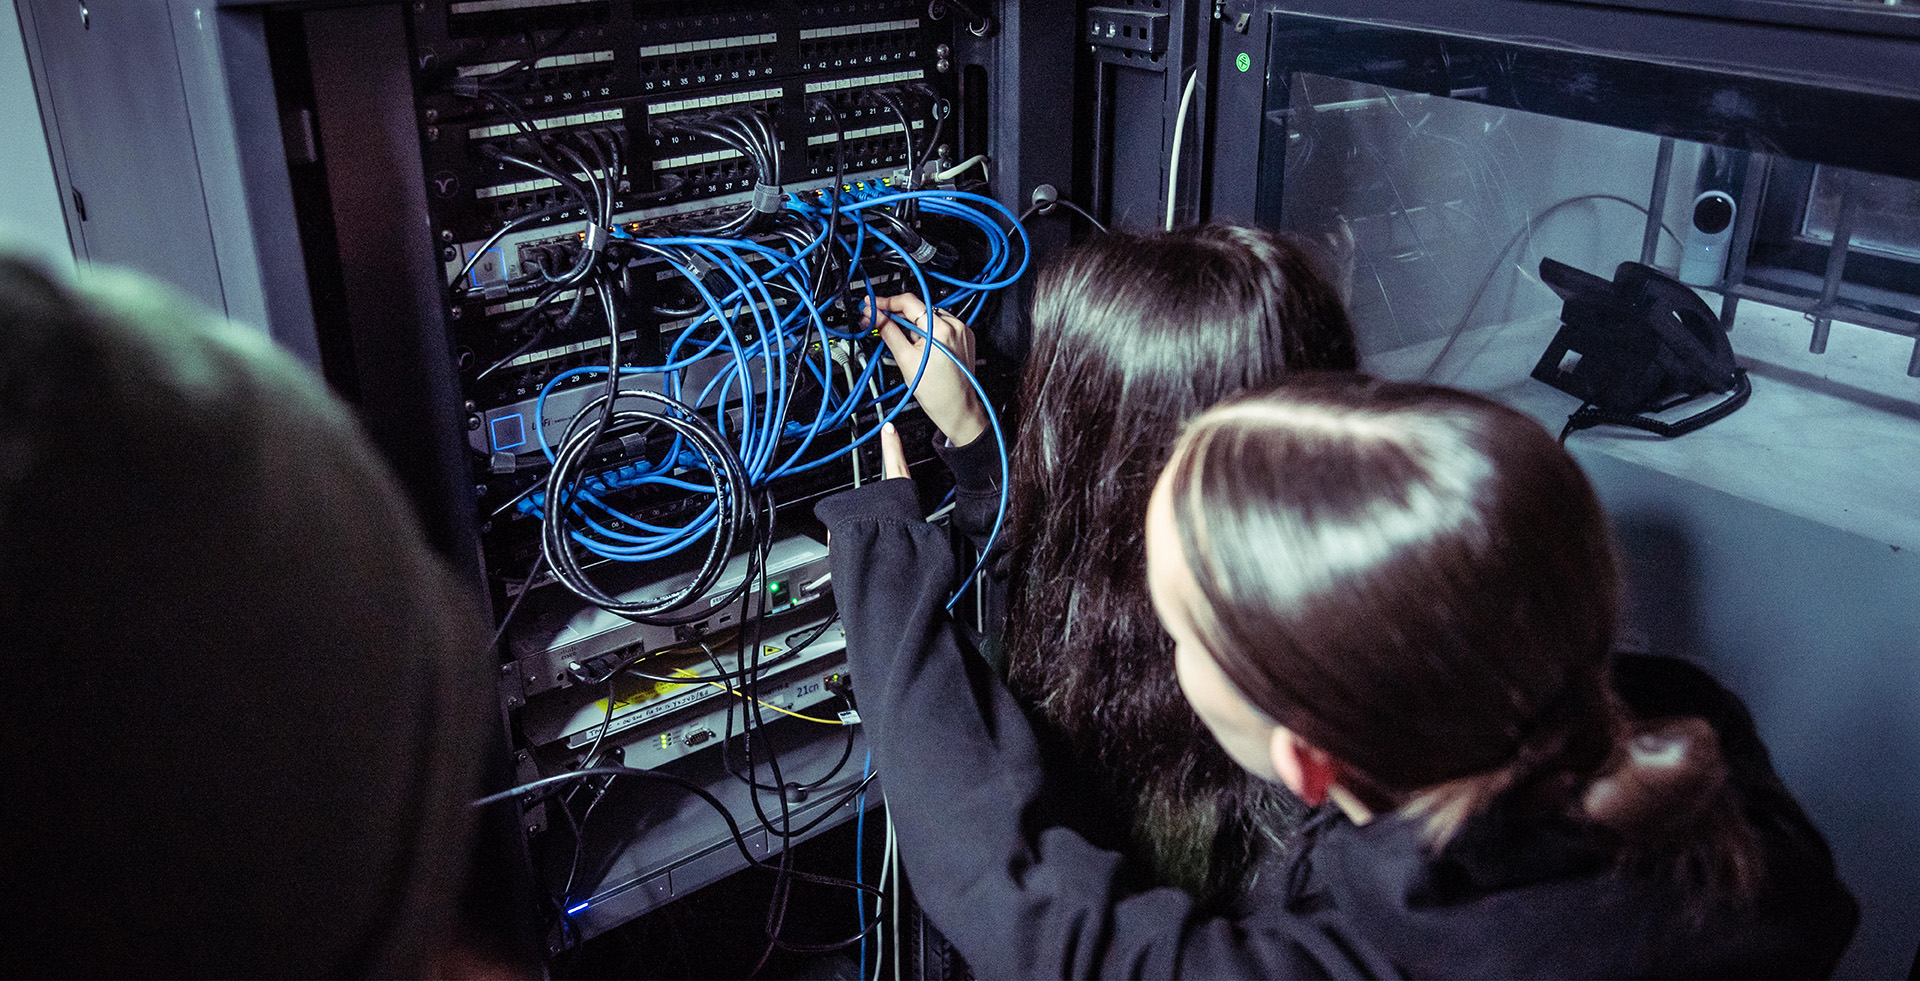 Two females work at a server filled with wiring